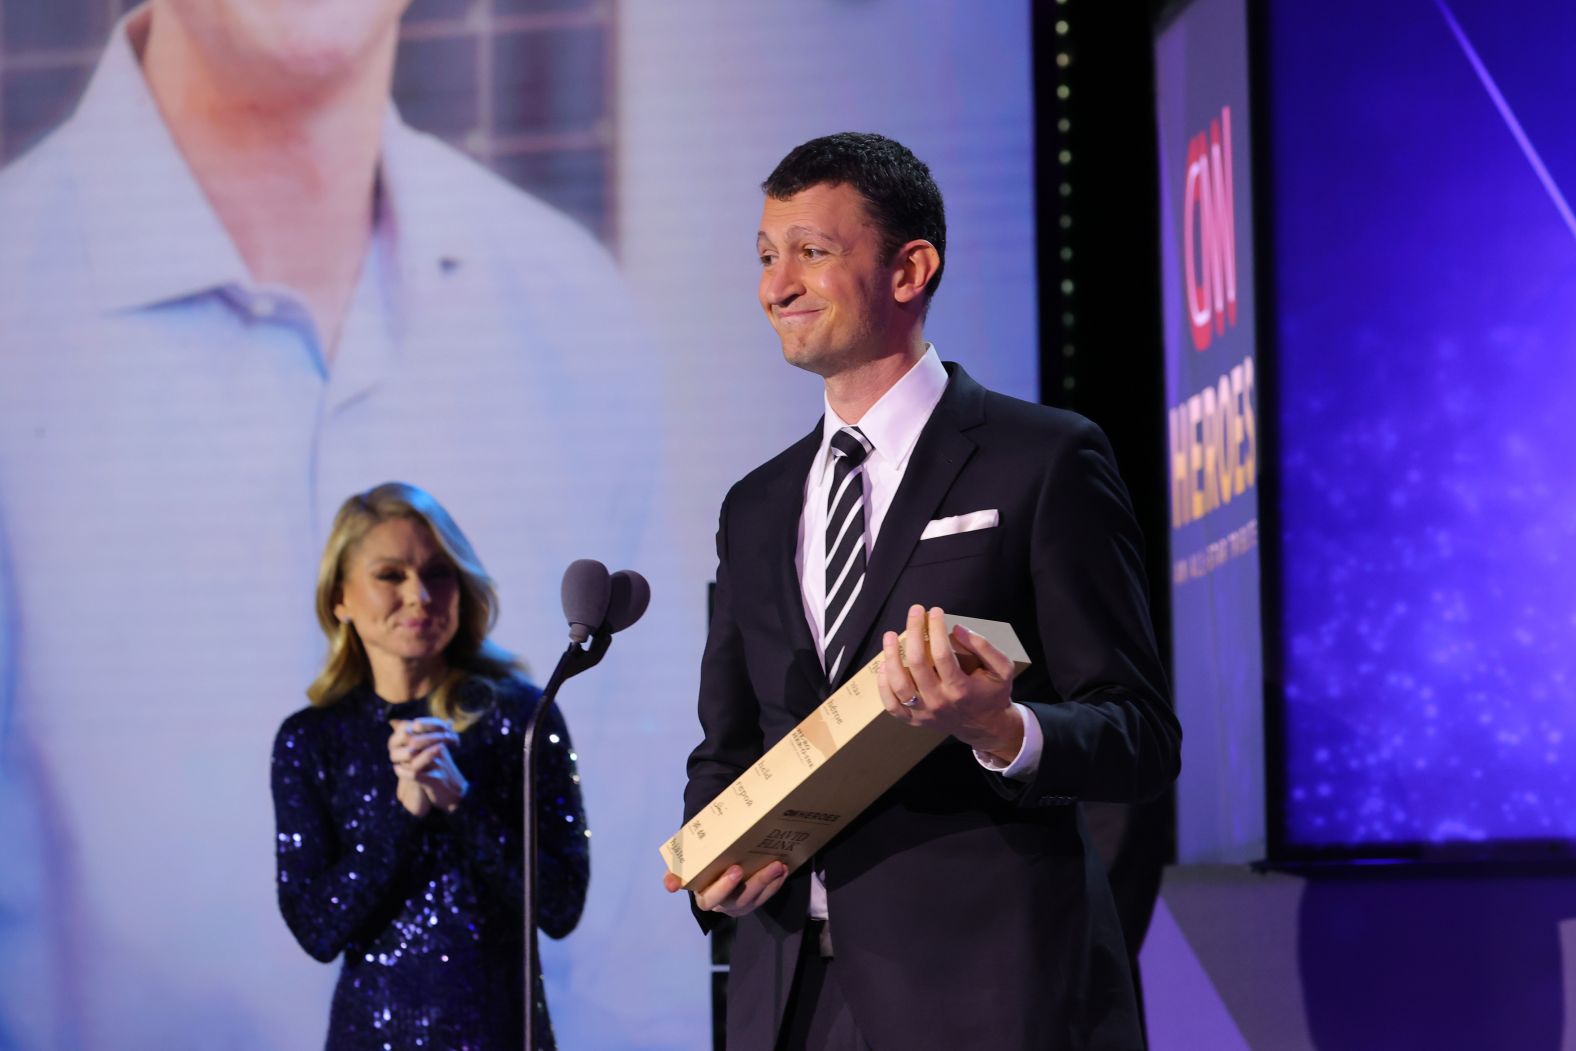 2021 CNN Hero David Flink accepts his award onstage from Kelly Ripa. Since 1998, <a href="index.php?page=&url=https%3A%2F%2Feyetoeyenational.org%2F" target="_blank" target="_blank">Eye to Eye</a> has grown into a nationwide non-profit that pairs middle school children who have a learning difference with a college or high school mentor who also has a learning difference.